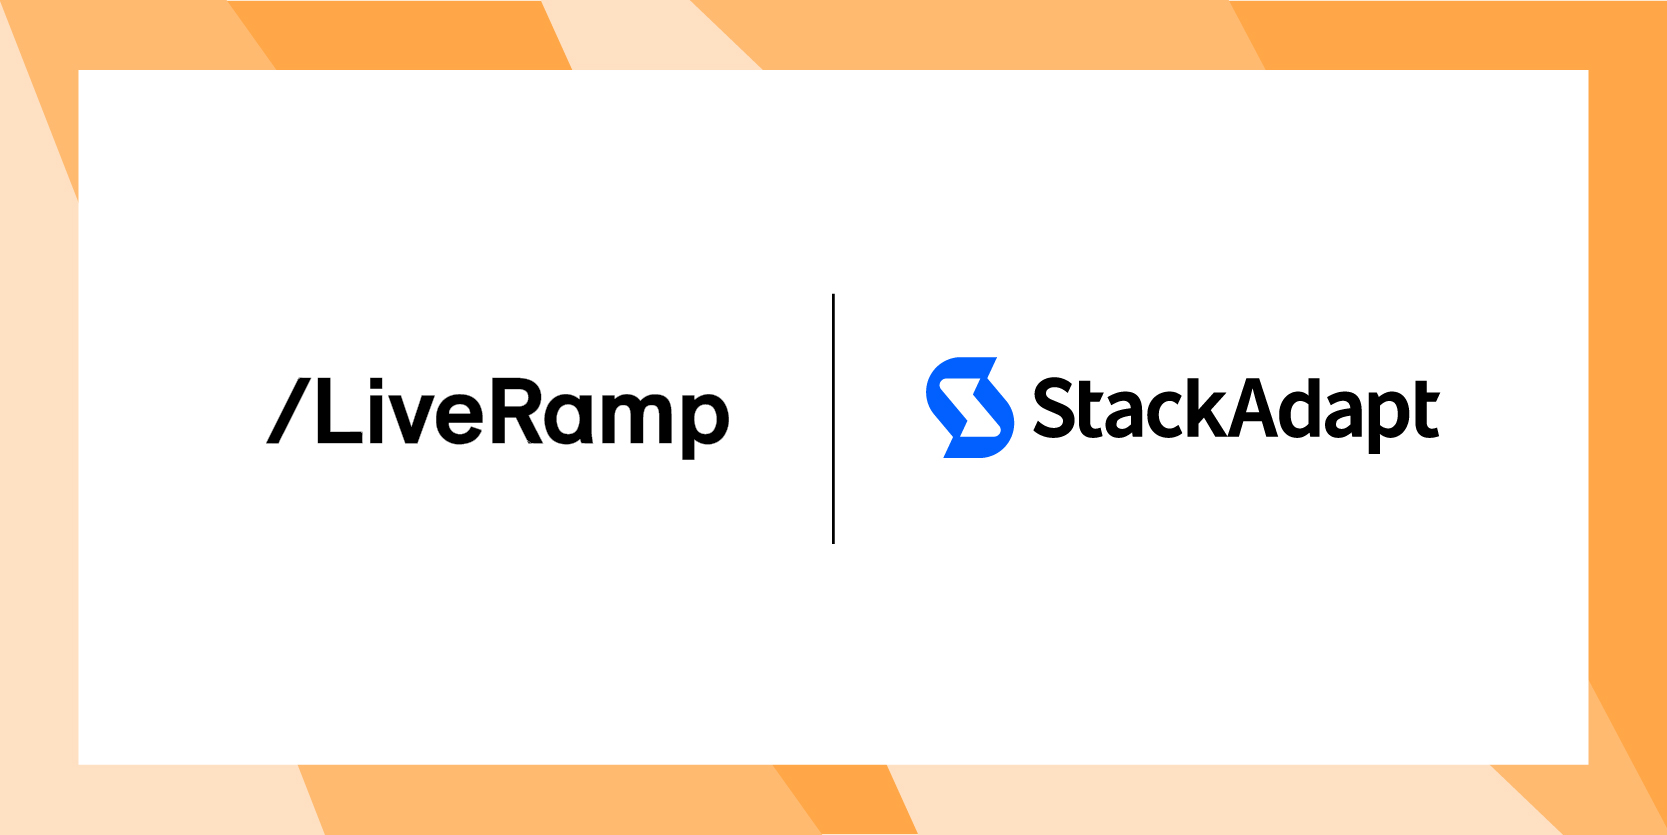 shows the logos of LiveRamp and StackAdapt side by side on a white background